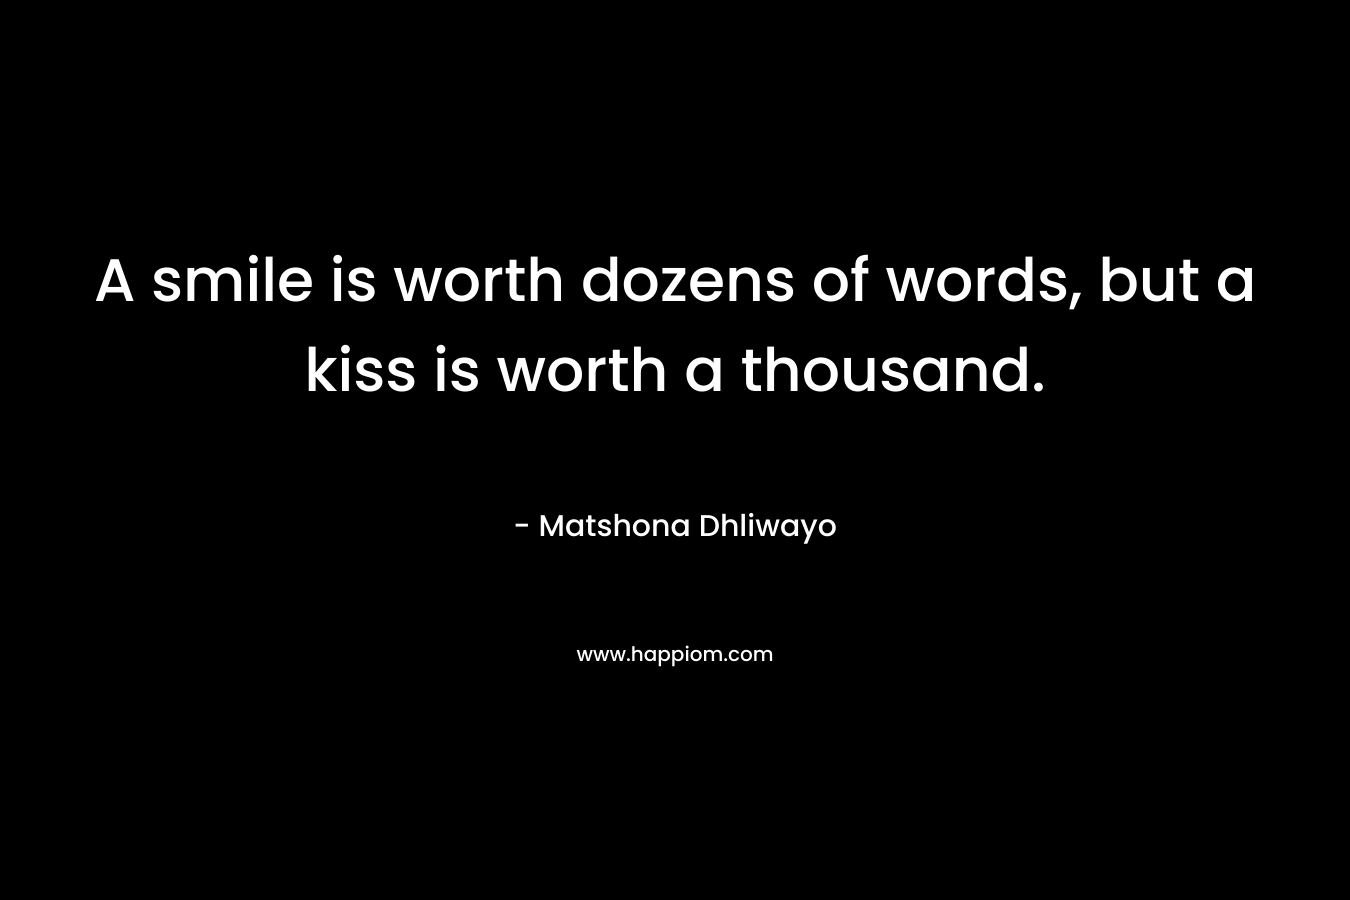 A smile is worth dozens of words, but a kiss is worth a thousand. – Matshona Dhliwayo